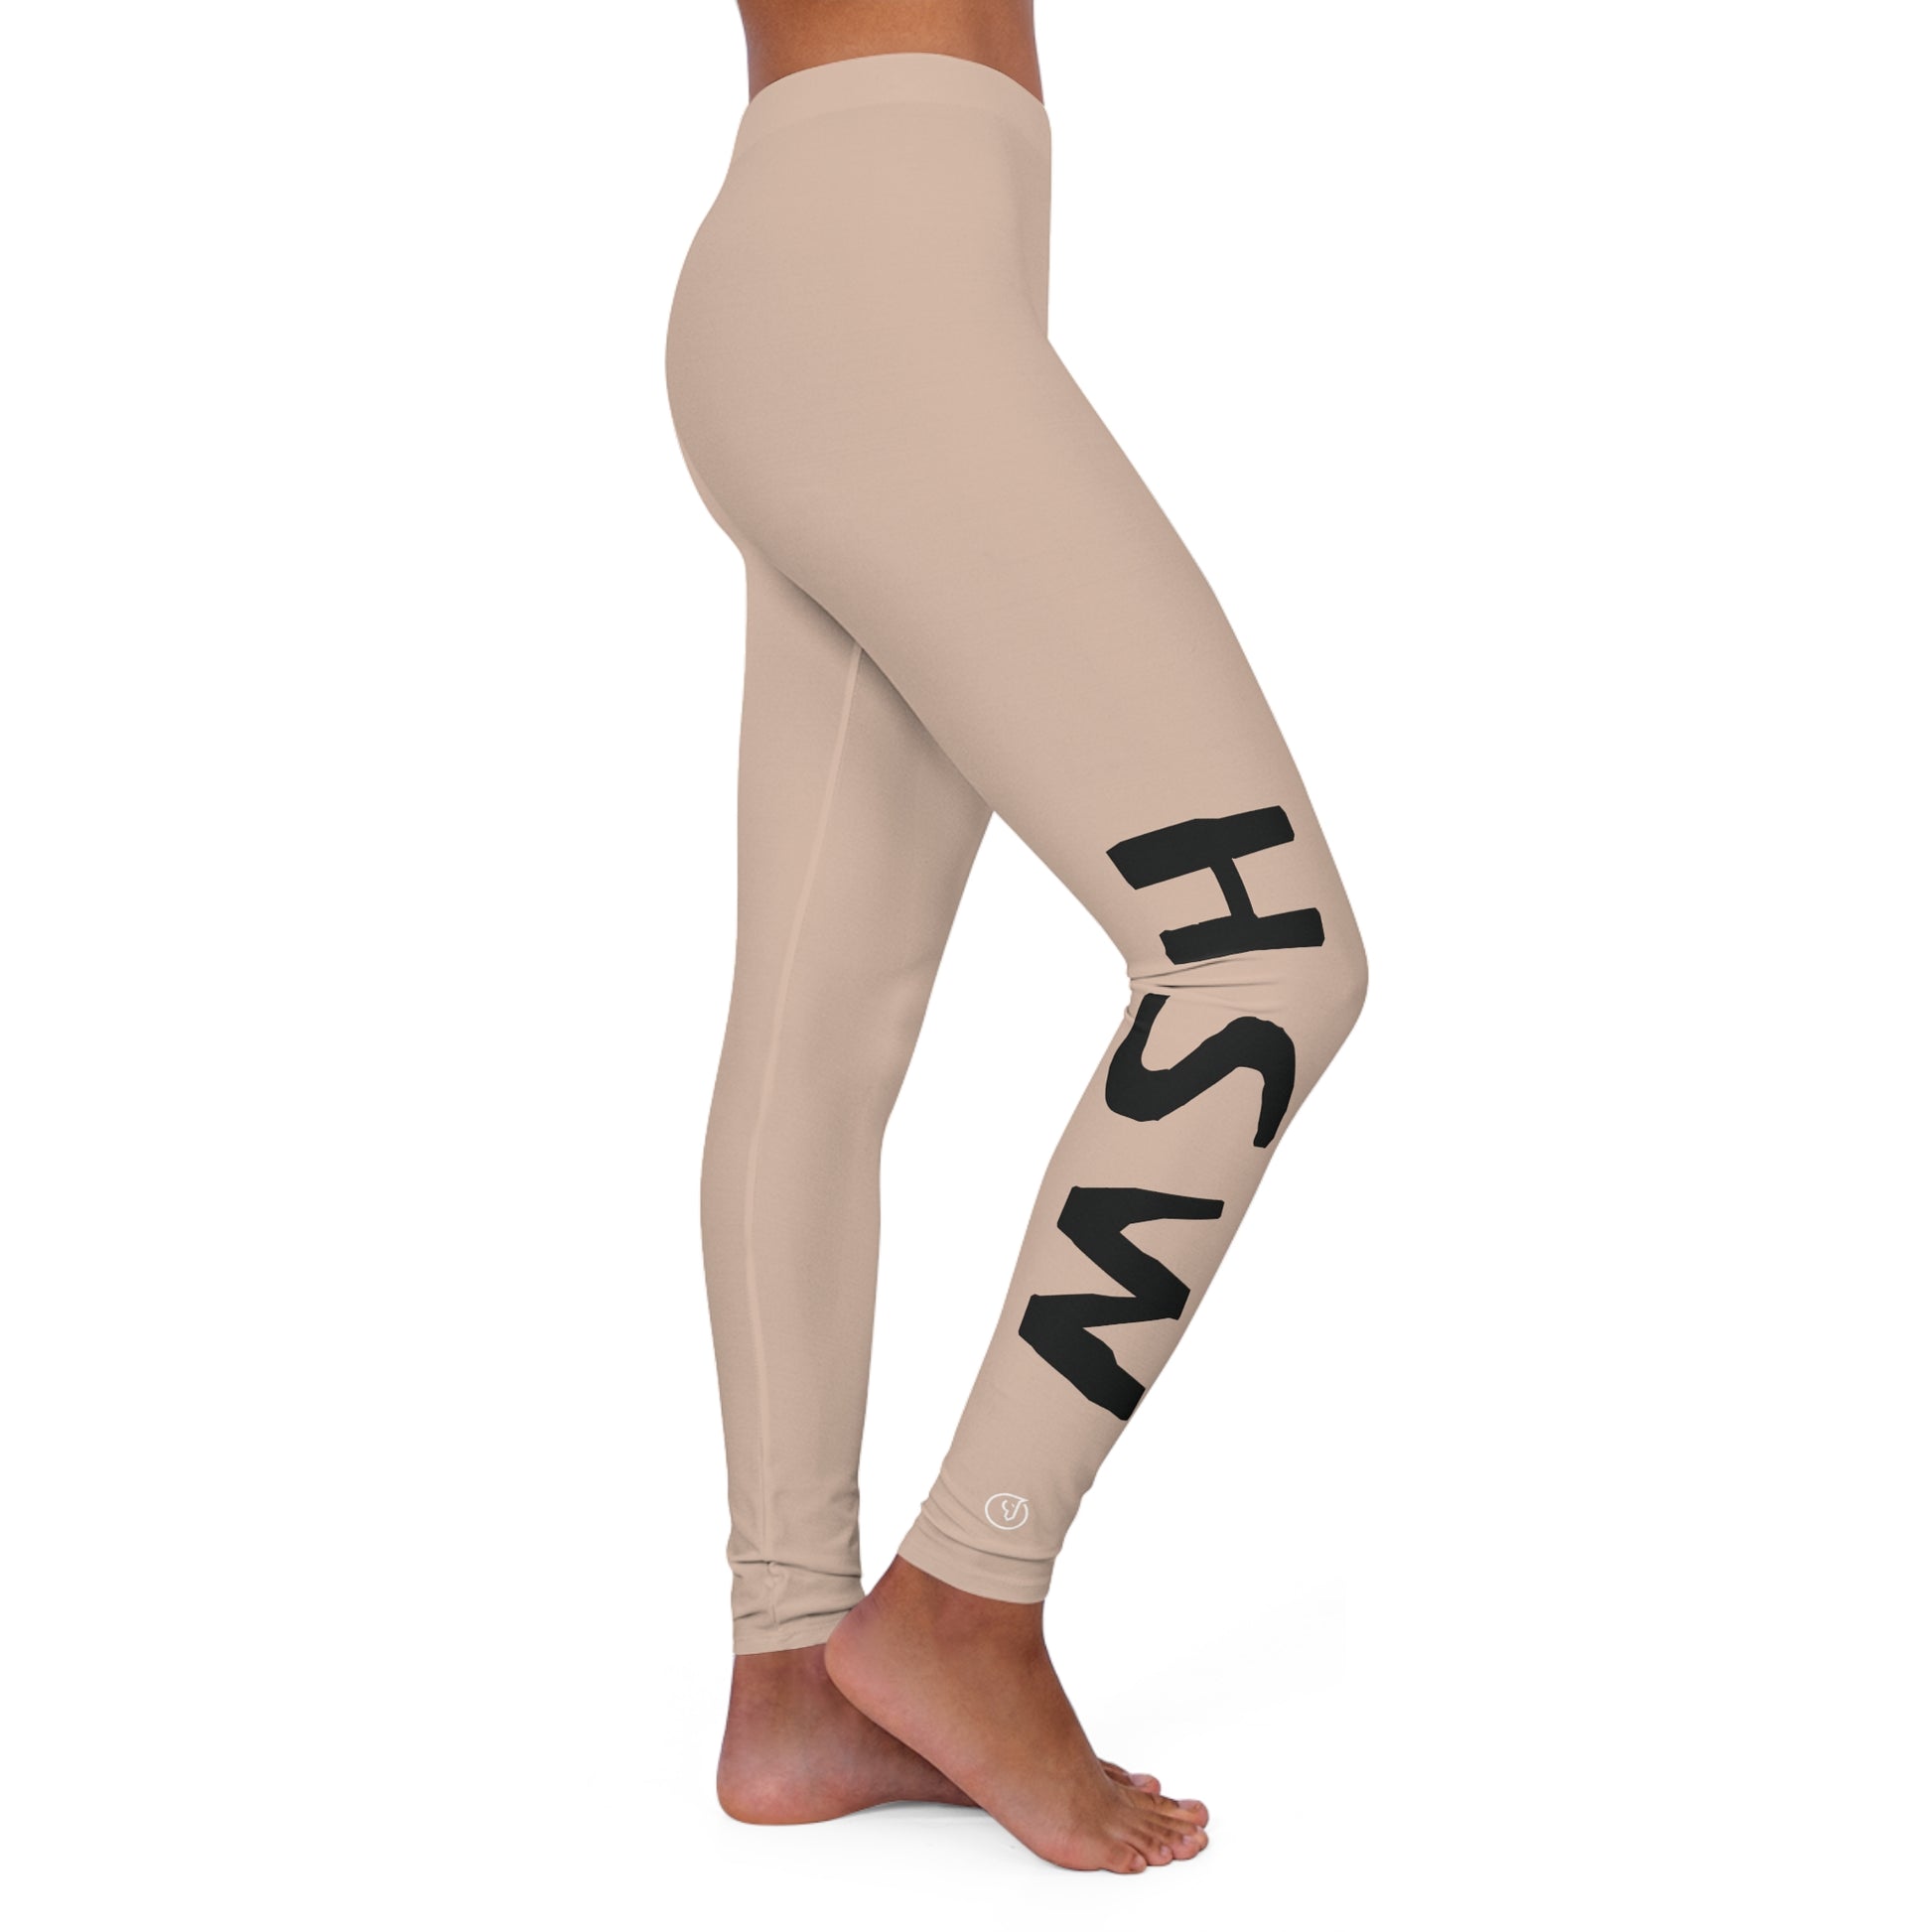 Humble Sportswear, women’s workout leggings, women’s active leggings, women’s casual leggings, women’s skinny fit leggings, made in the USA clothing 